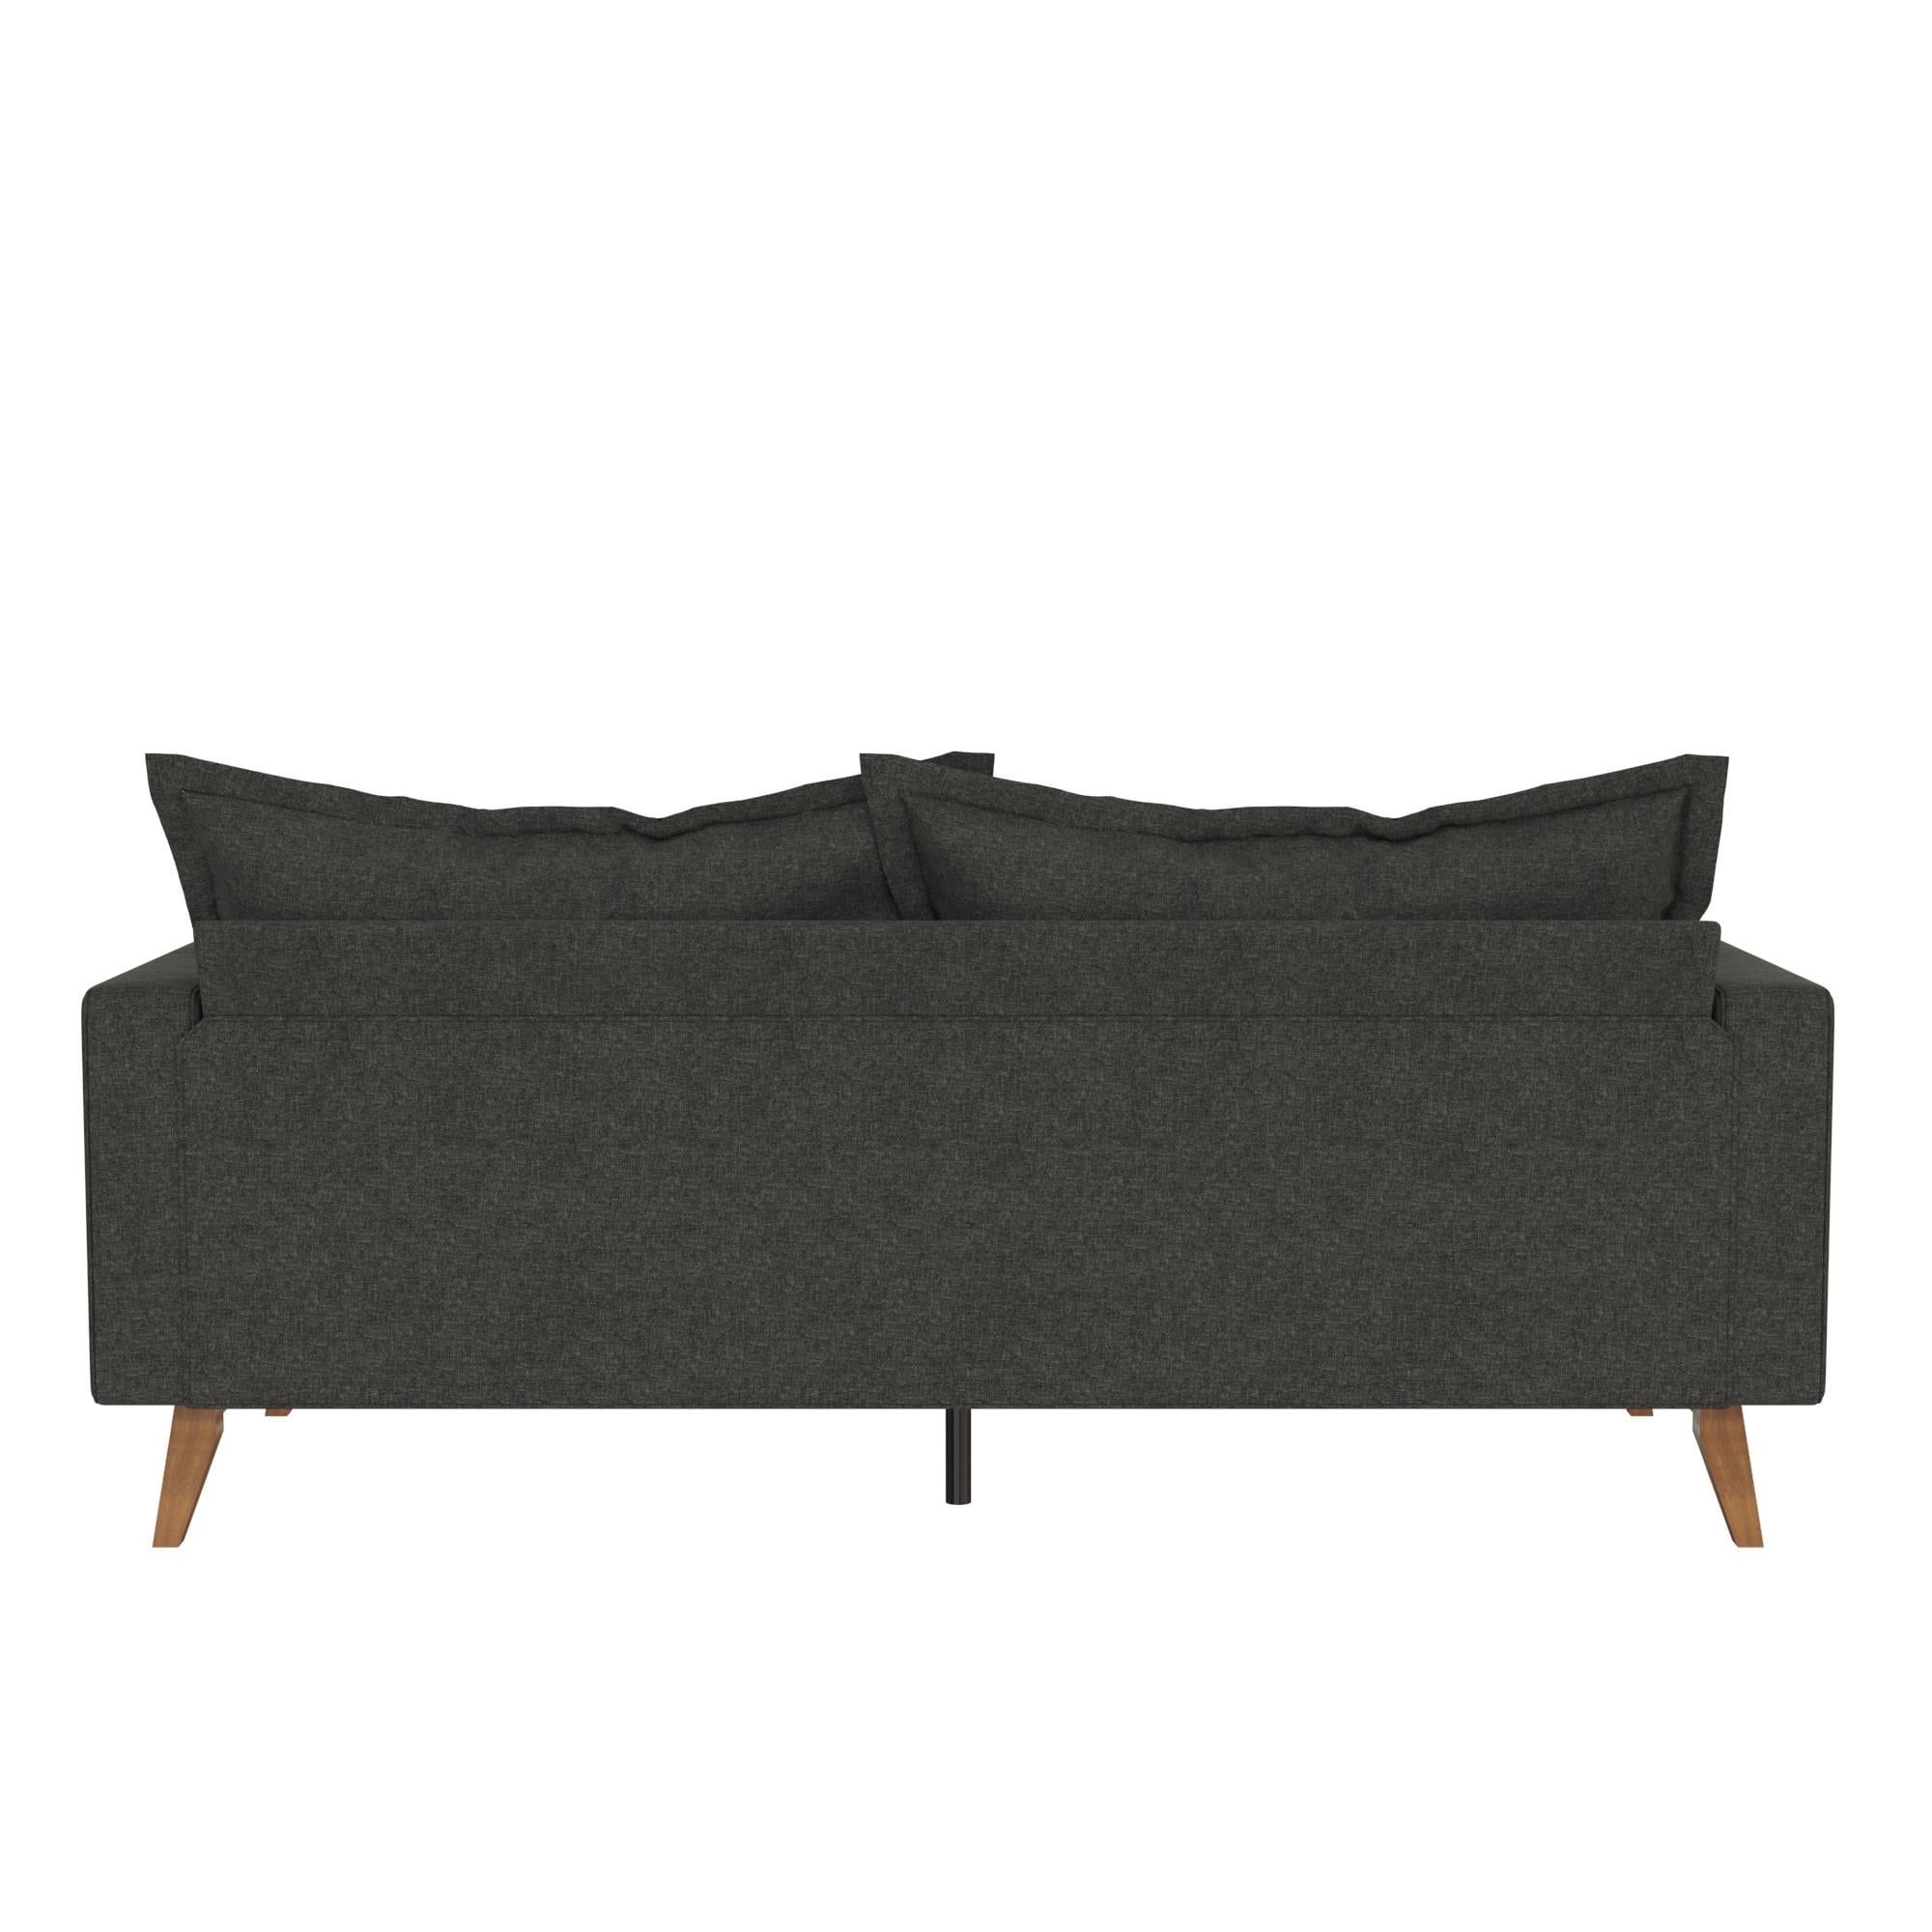 Dhp Miriam Pillowback Wood Base Sofa, Gray Linen – Walmart With Regard To Sofas With Pillowback Wood Bases (Photo 3 of 15)